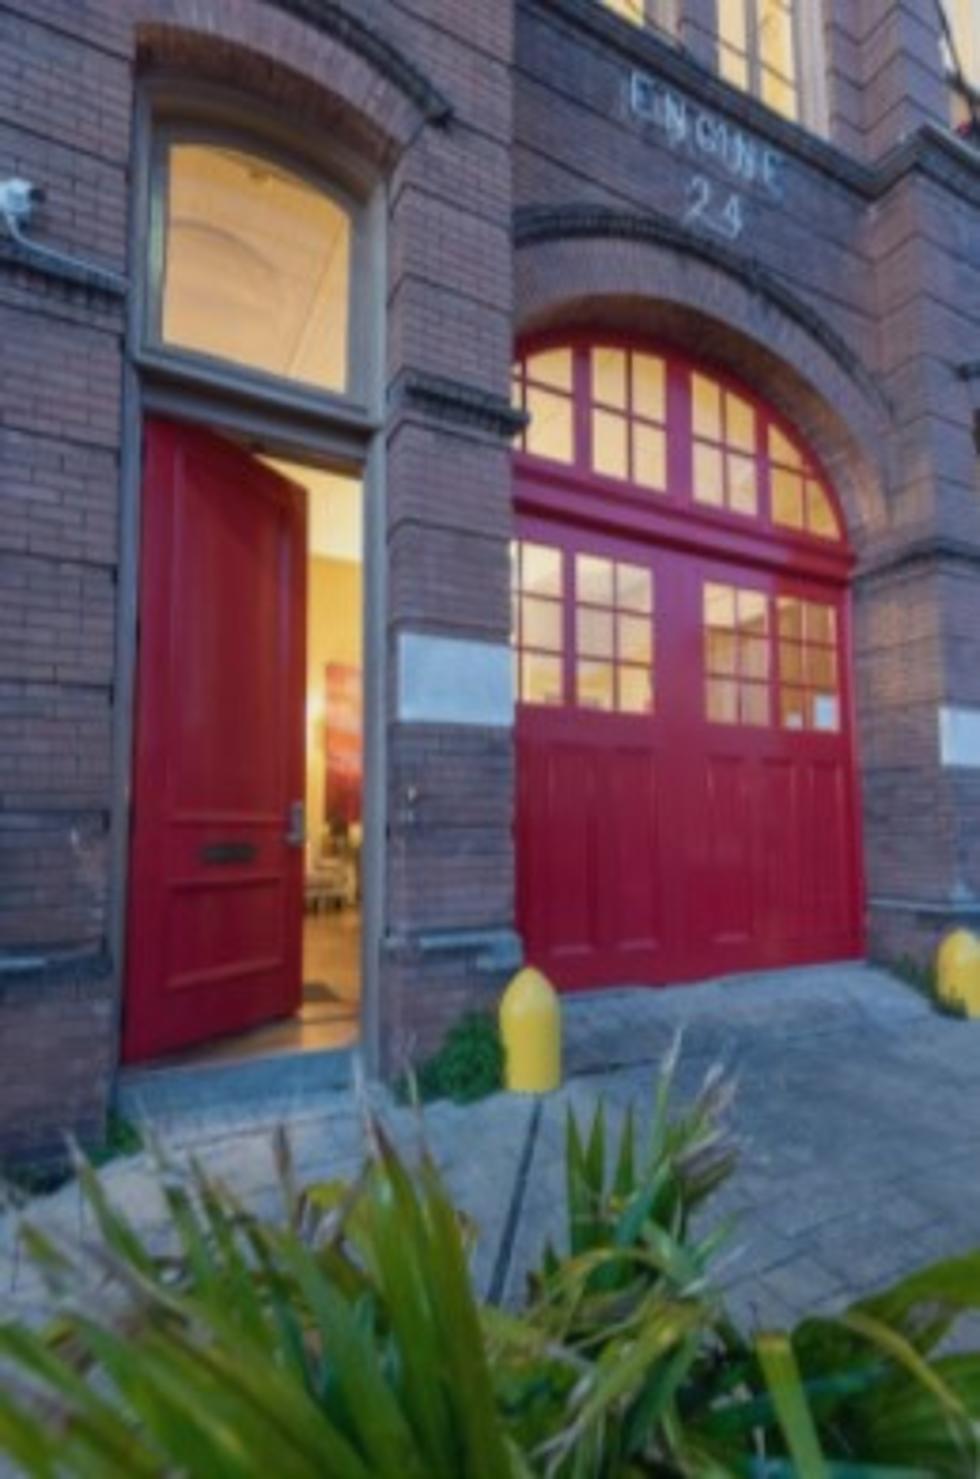 Make Your Weekend Fire! Stay at the Station 24 Airbnb in New Orleans